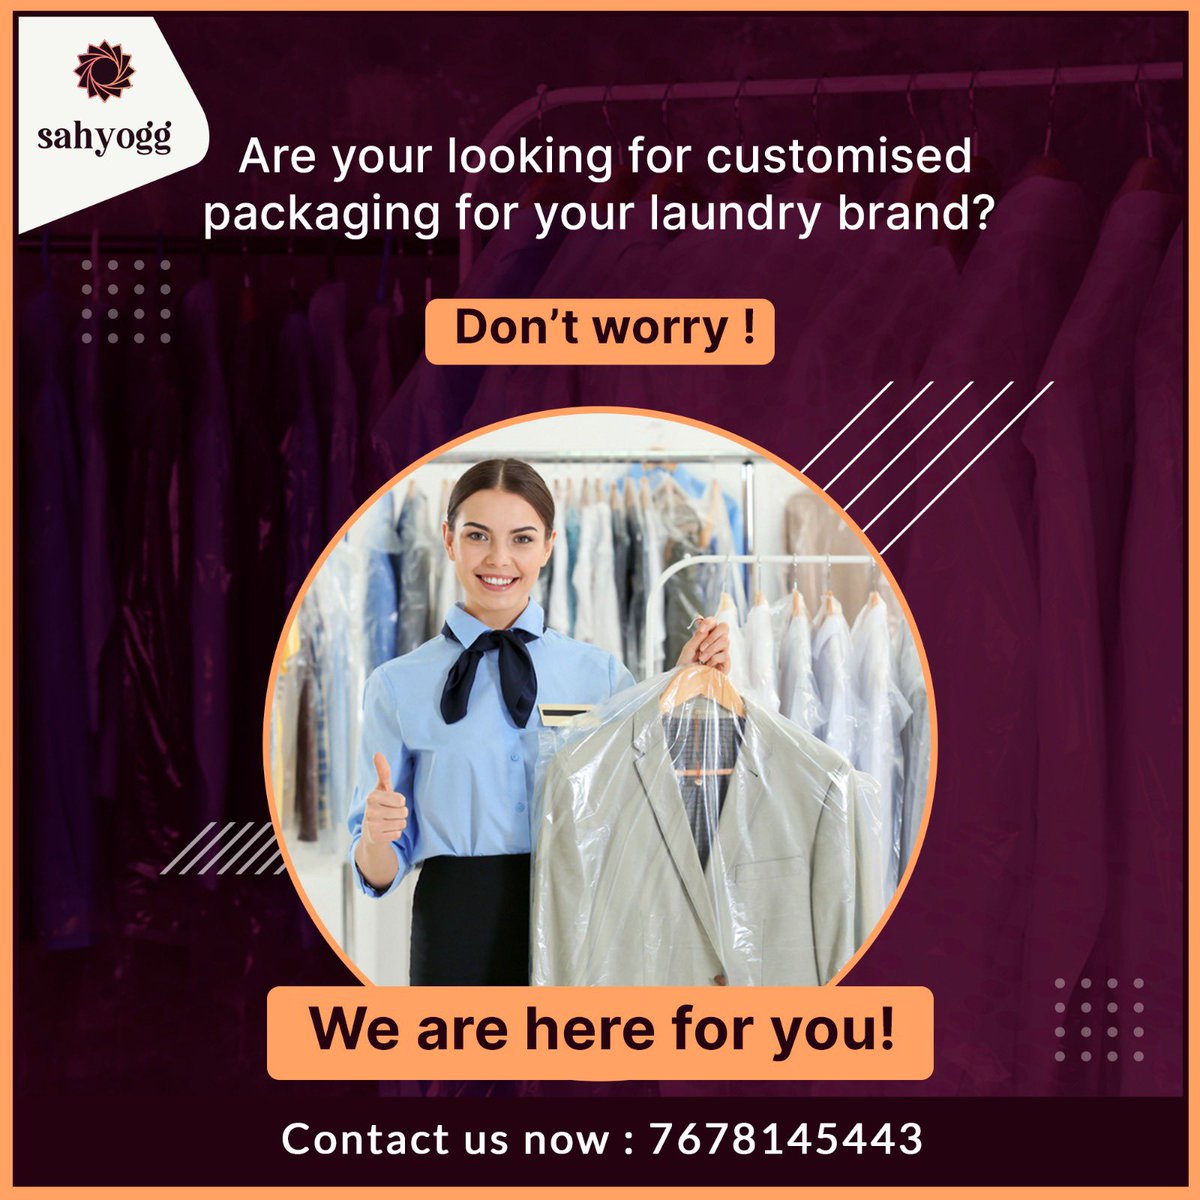 Want customised packaging for your laundry brand?
Don’t worry! 
Call us now on 7678145443

#Sahyogg #packaging #laundry #laundrybusiness #drycleaning #laundryequipments #customisedpackaging #laundrybusinessindia #business